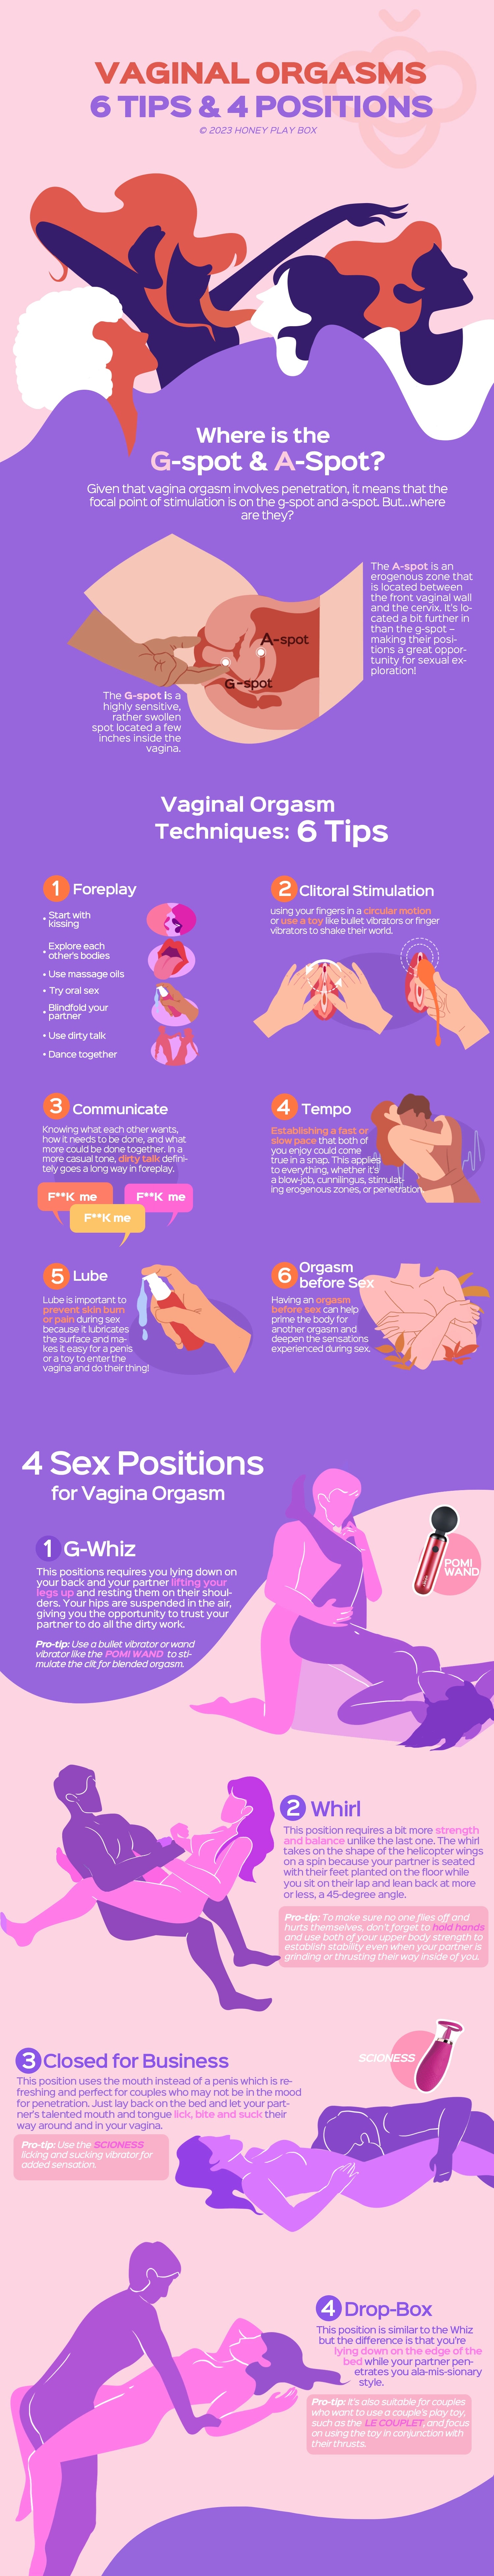 Vaginal Orgasms An Updated Classic with 6 Tips & 4 Positions